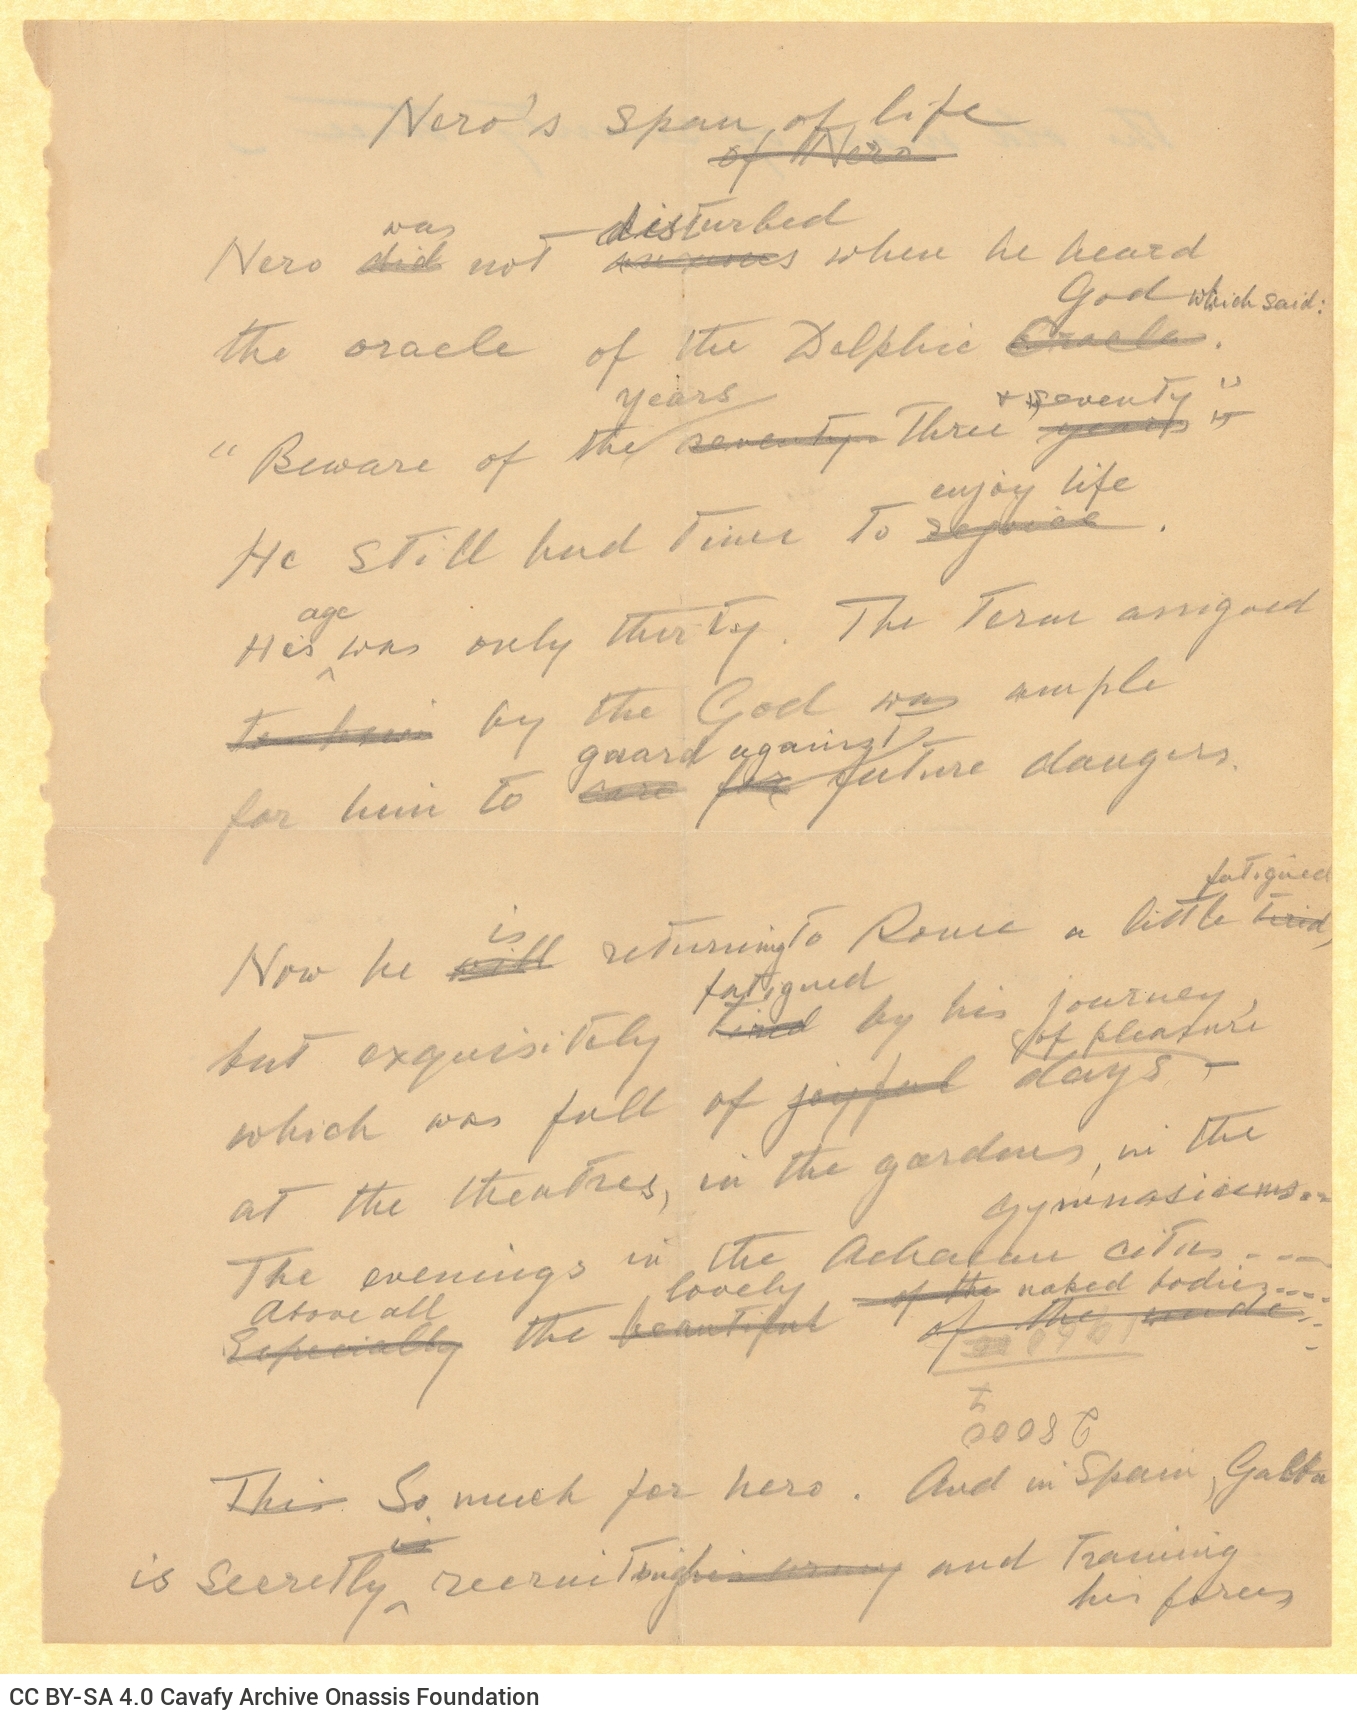 Handwritten translation into English of the poem "Nero's Deadline" on both sides of a sheet. The handwriting is not Cavafy